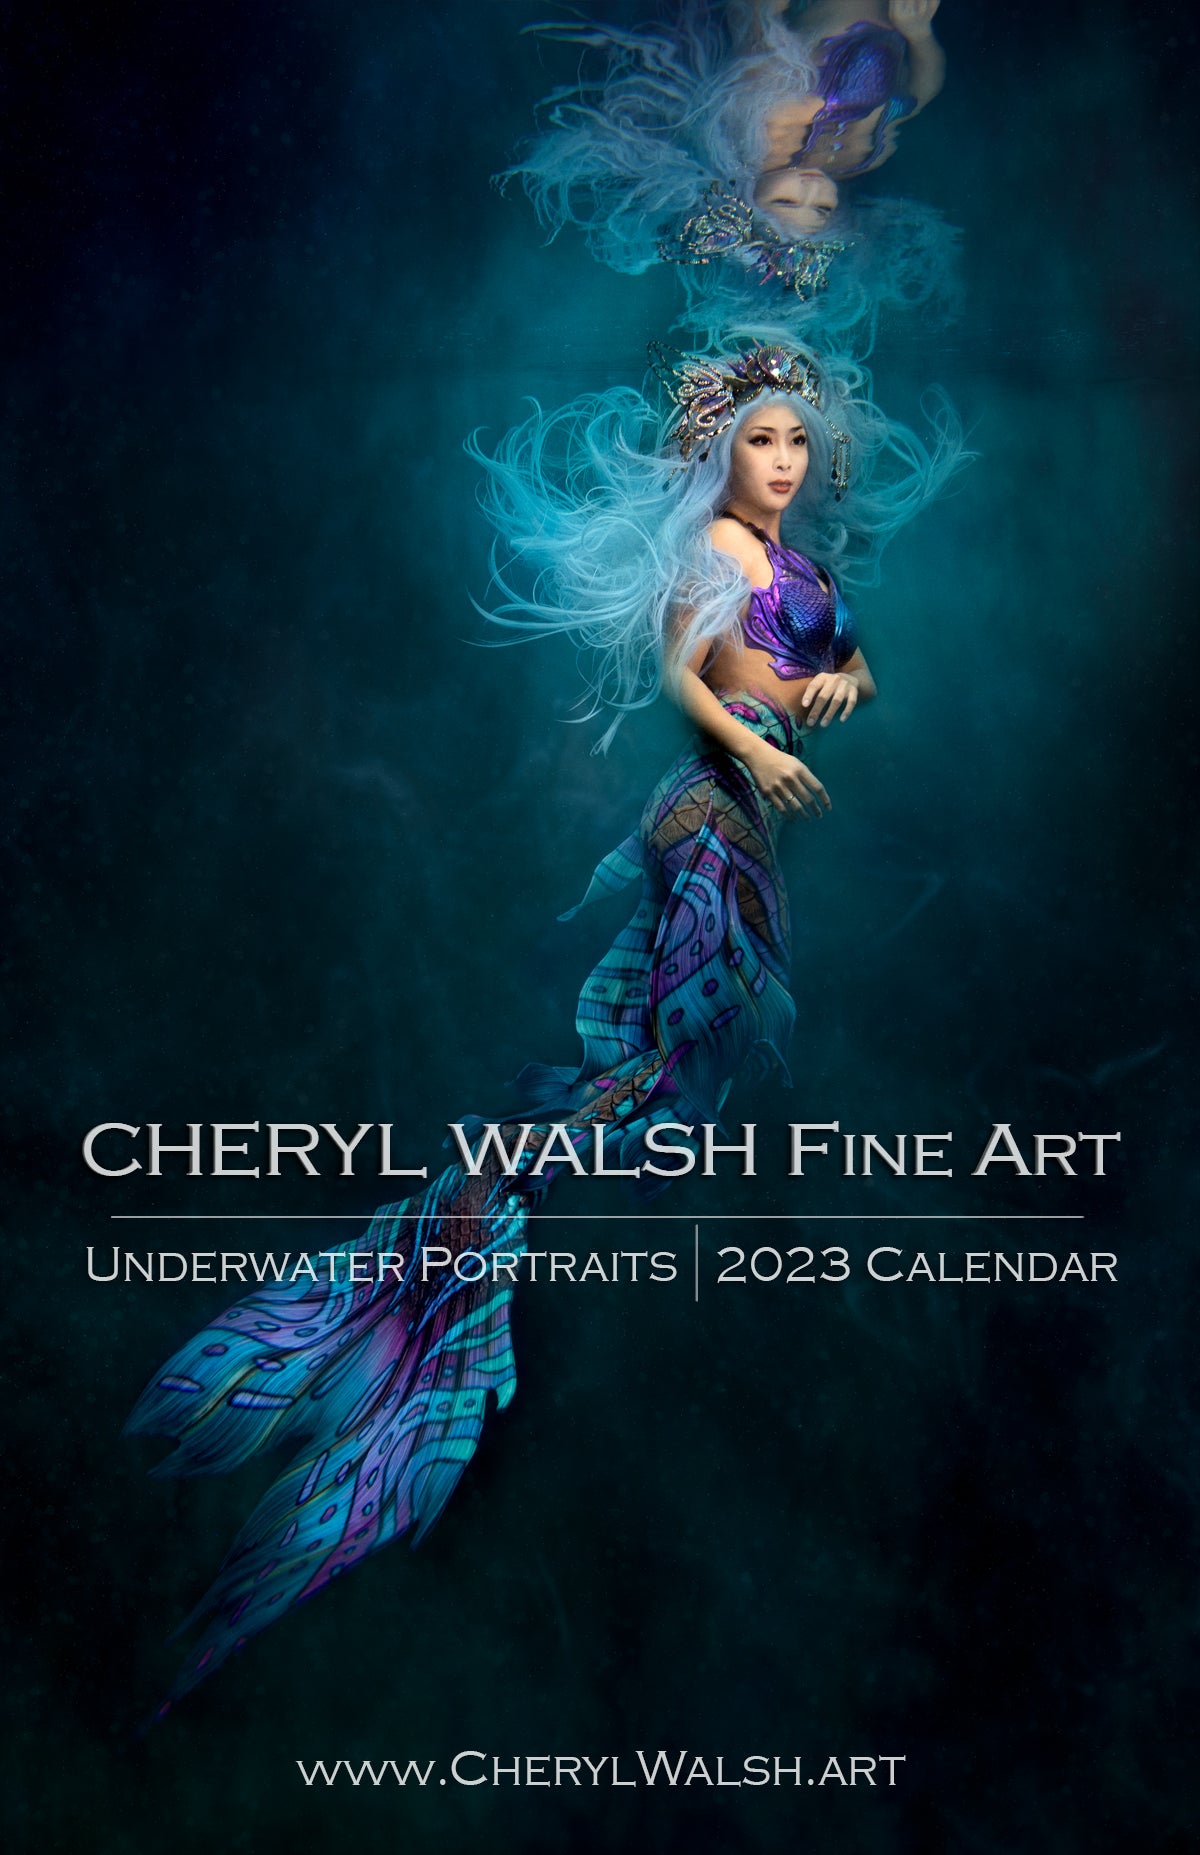 2023 Cheryl Walsh Underwater Photography Calendar SOLD OUT